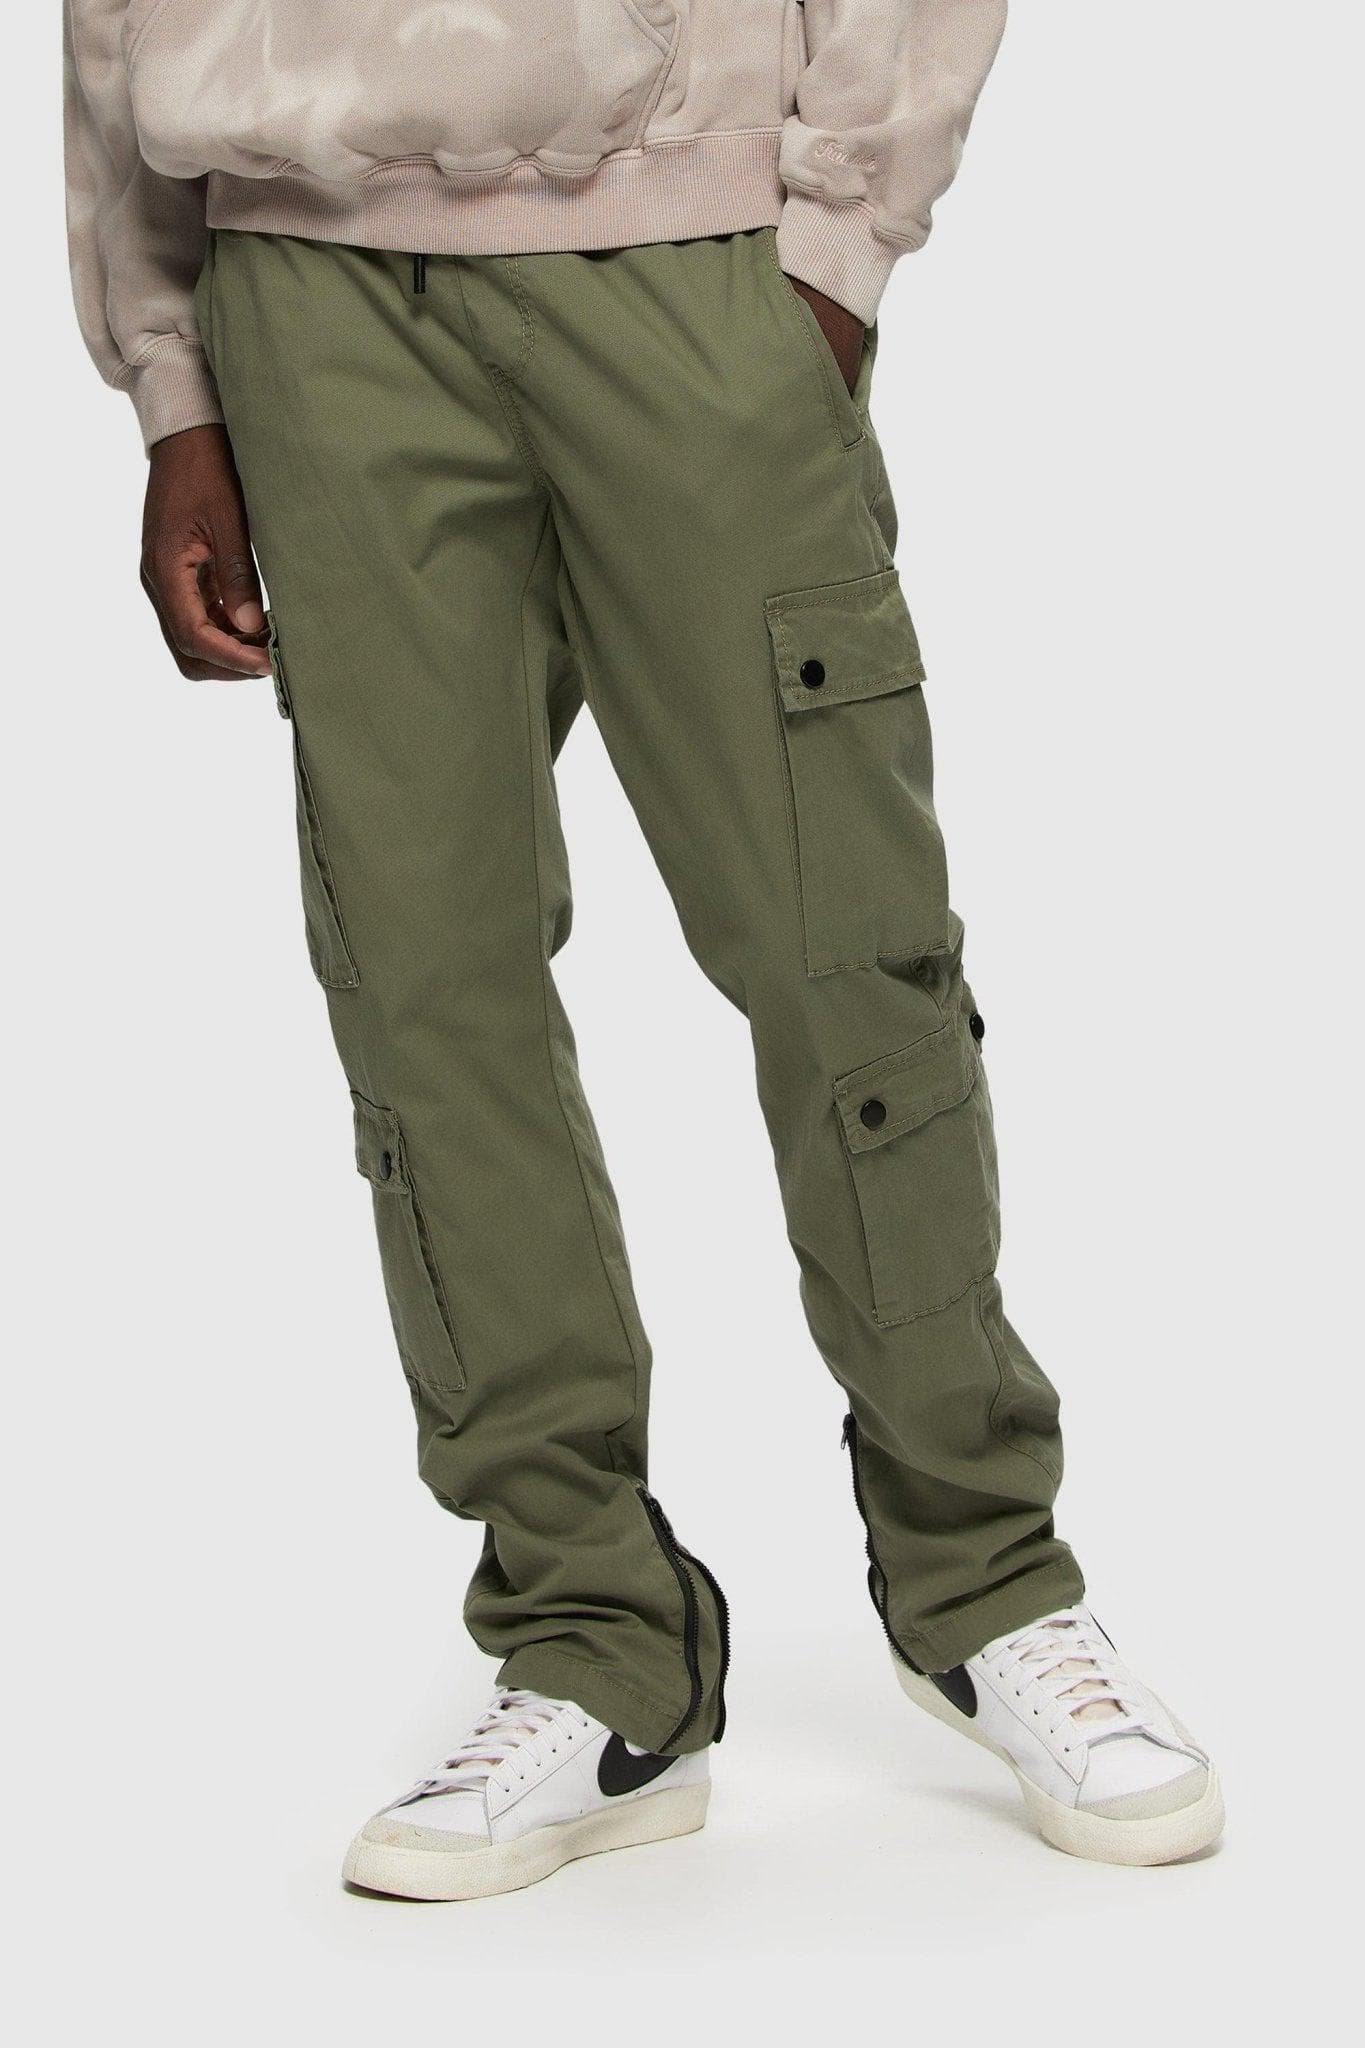 Dorothee Schumacher - Slouchy Coolness Olive Green Cargo Pant